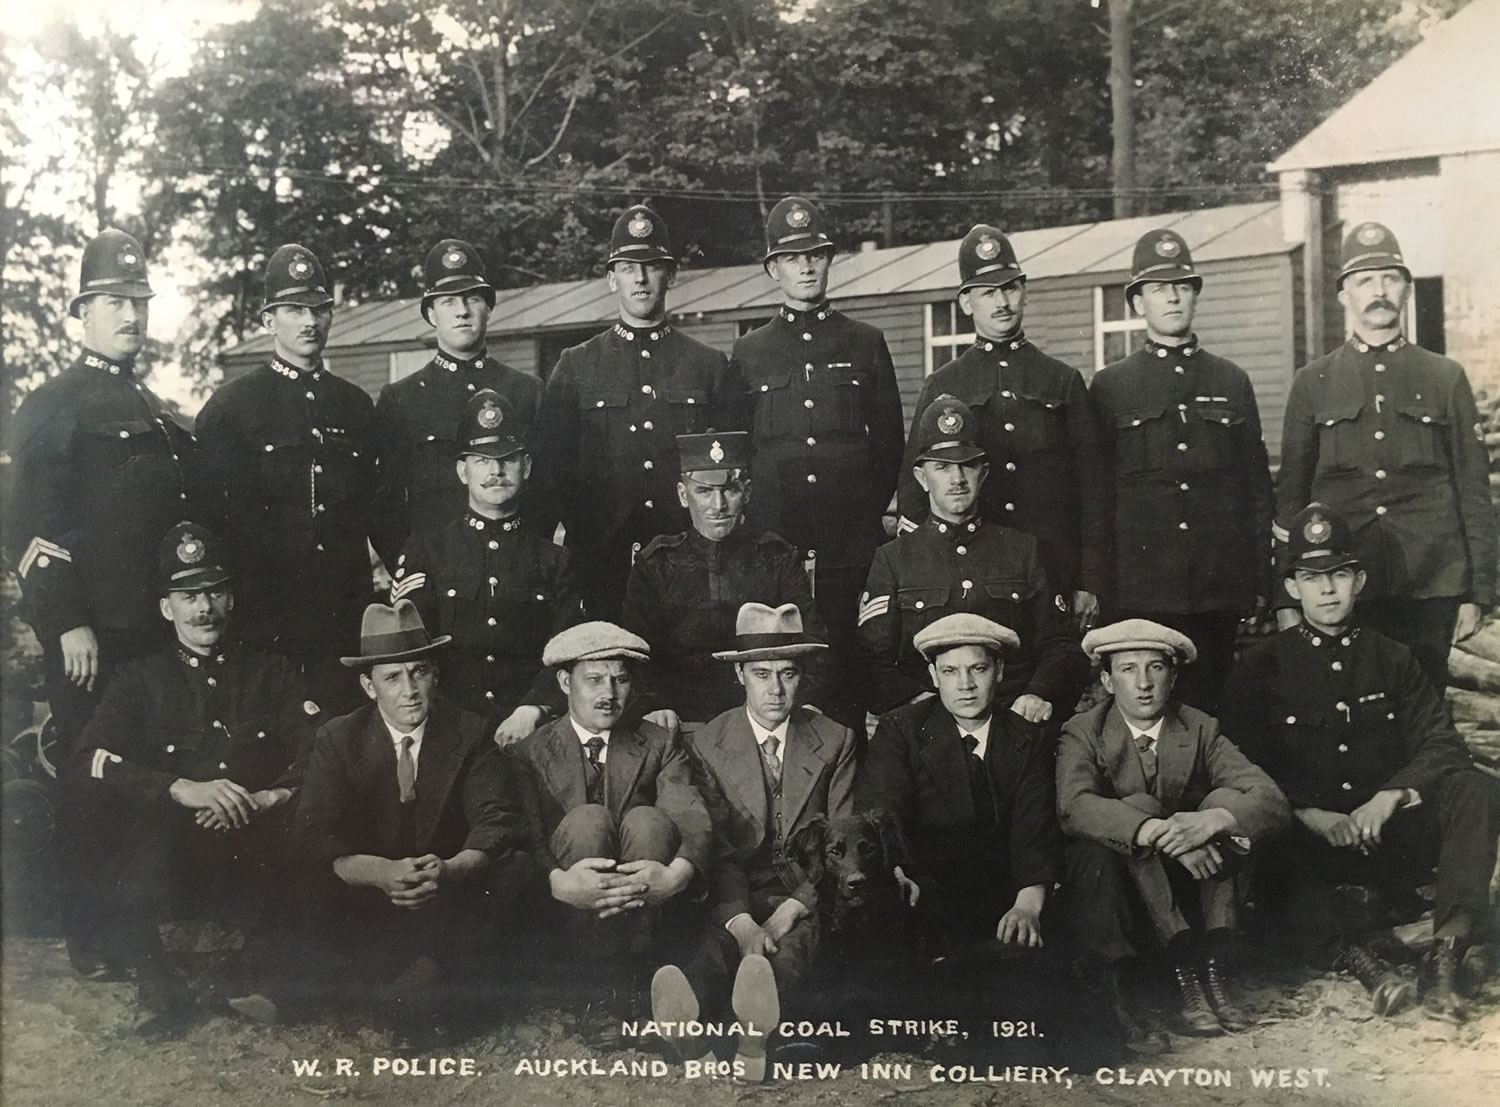 Auckland Brothers with police at New Inn Colliery during Strike, 1921 - Jodie Whittaker's great grandpa, Edwin Auckland, far right and 3 great uncles